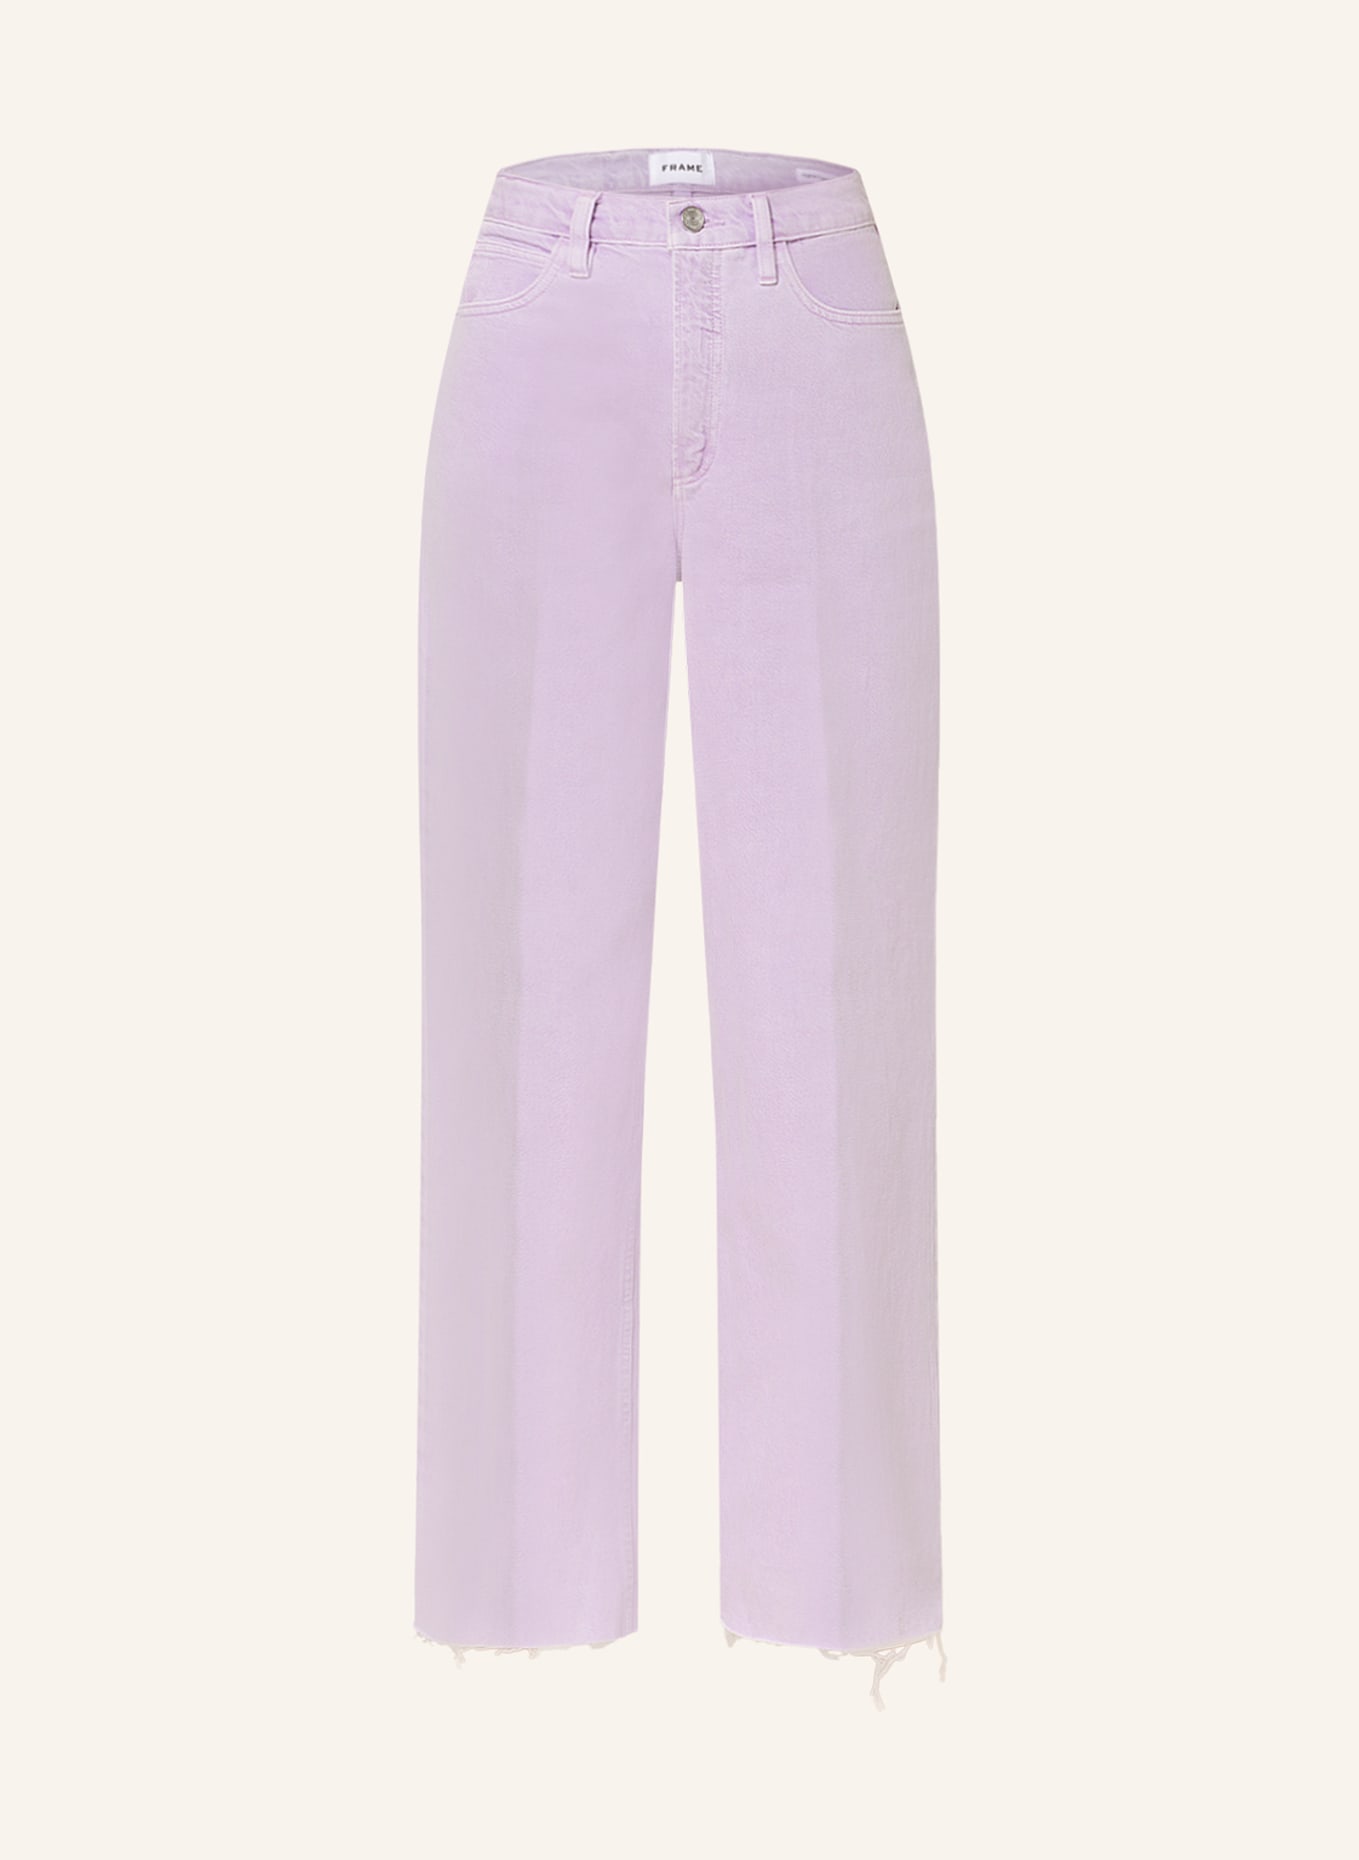 FRAME Jeans LE HIGH 'N' TIGHT, Farbe: WALI WASHED LILAC (Bild 1)